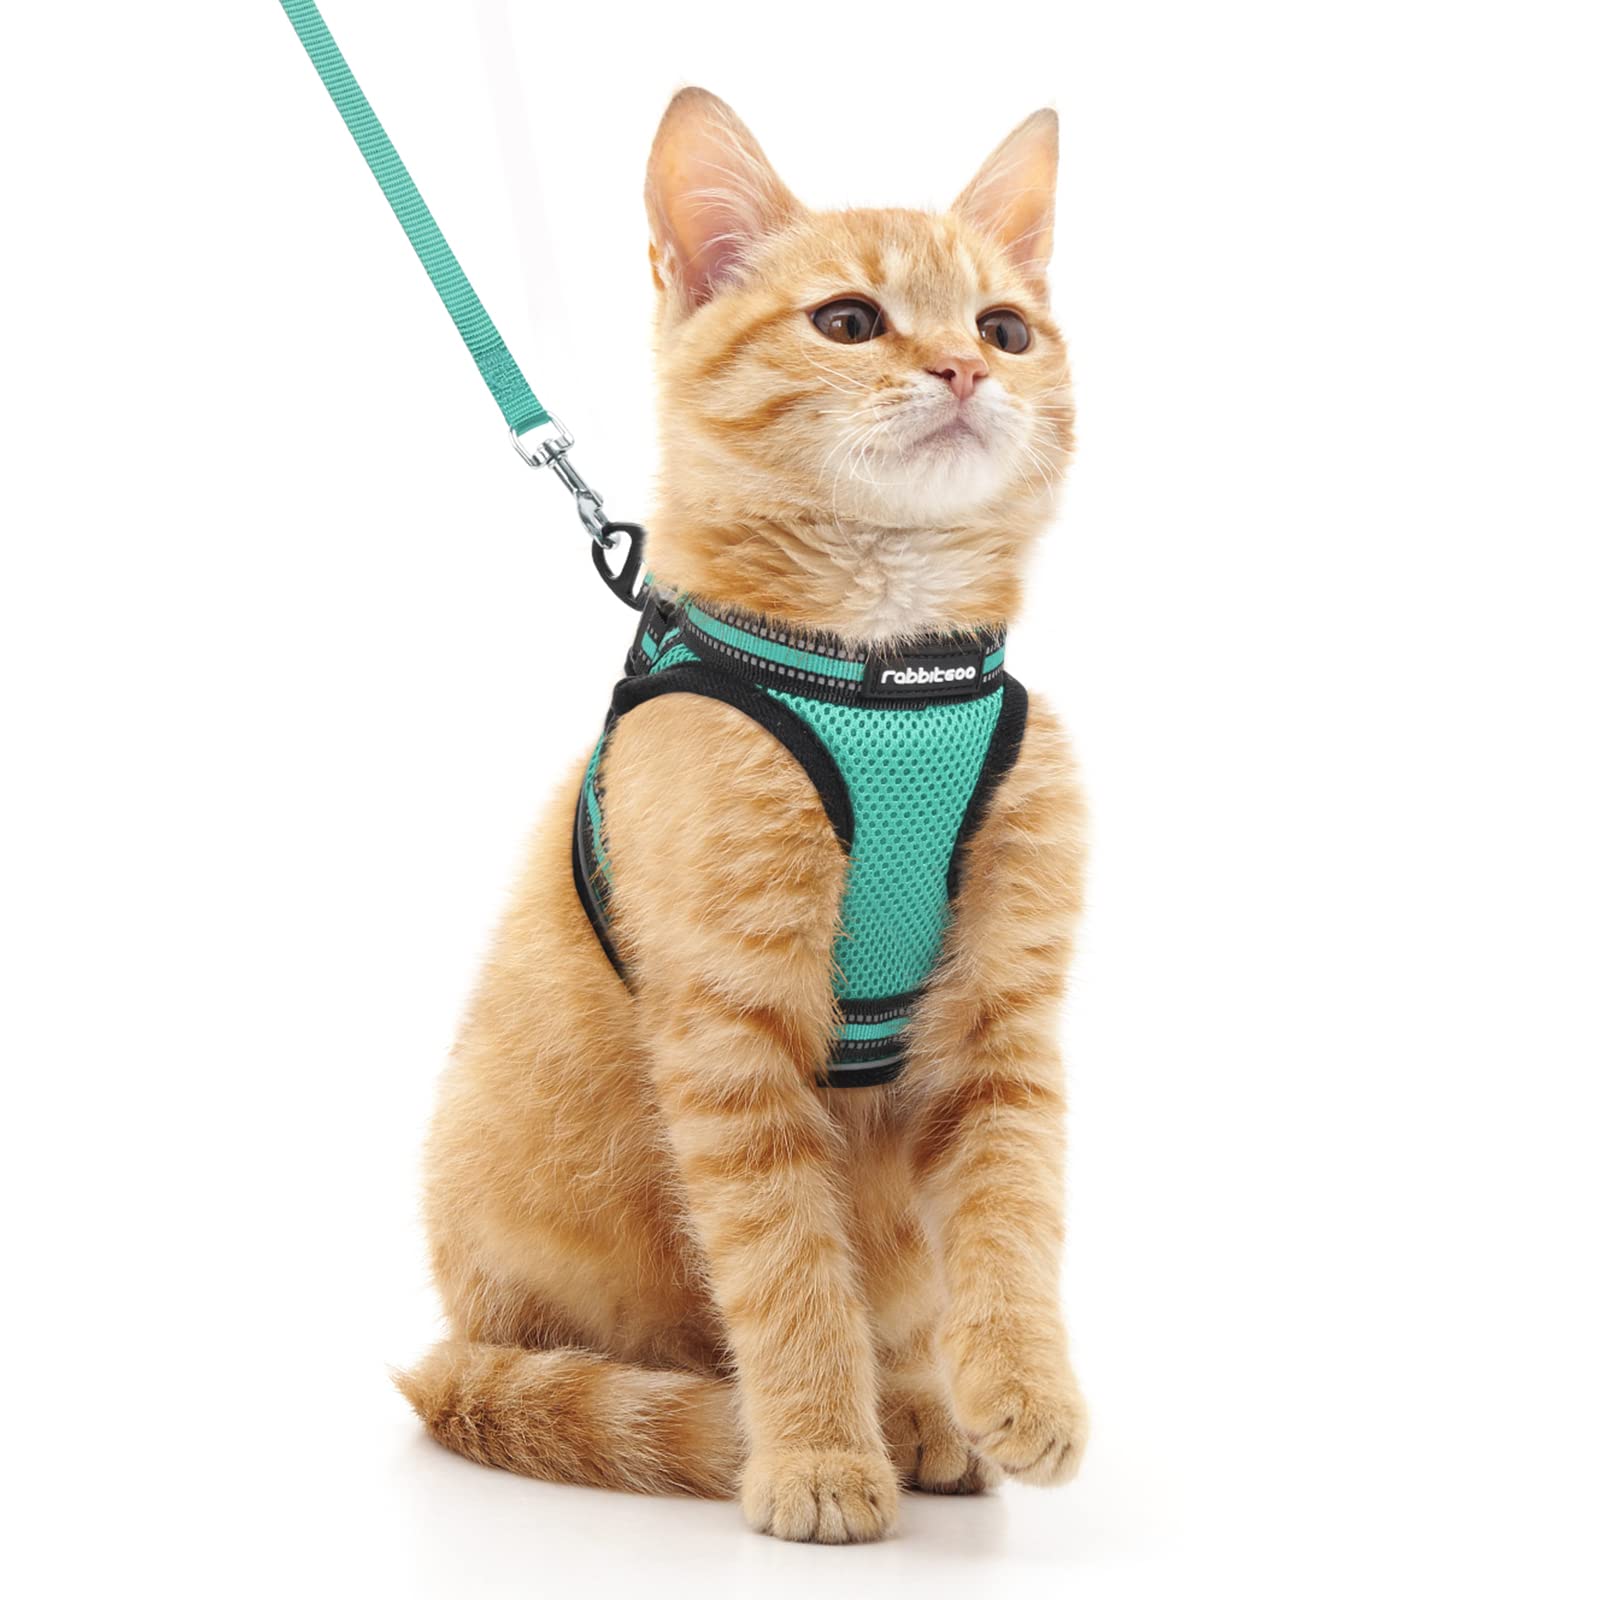 rabbitgoo cat Harness and Leash Set for Walking Escape Proof, Adjustable Soft Kittens Vest with Reflective Strip for cats, comfo